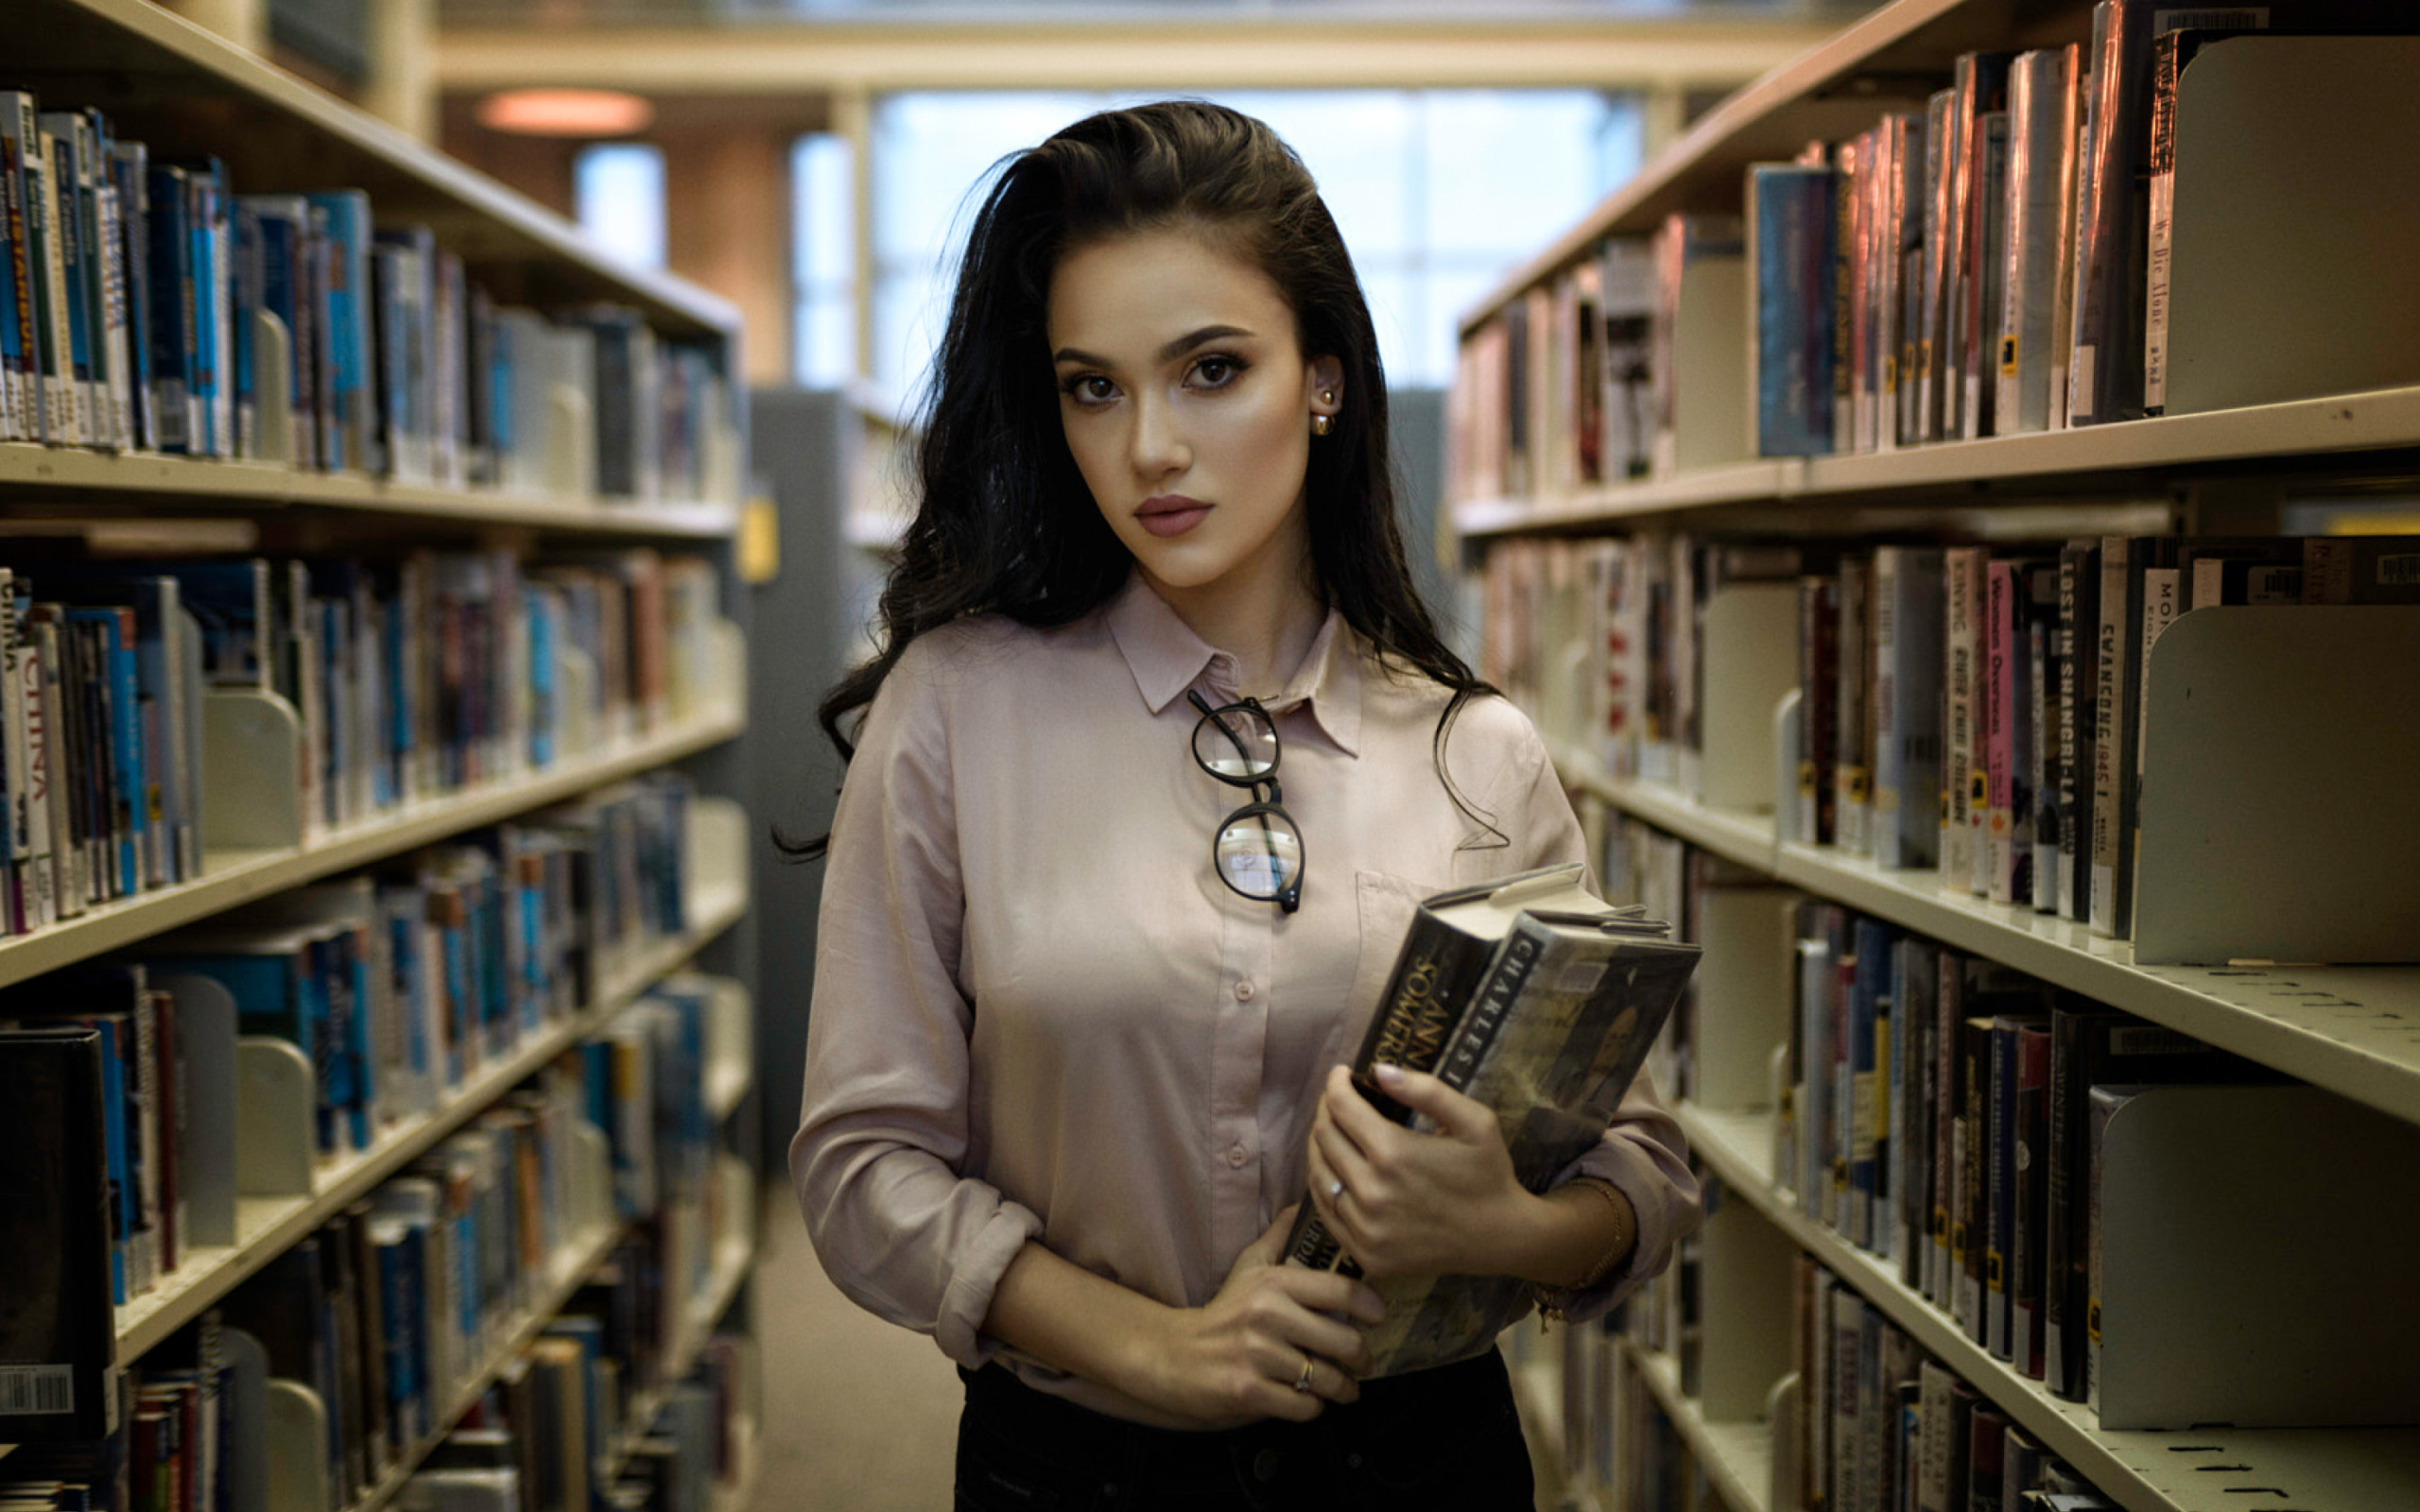 Girl with books in library screenshot #1 2560x1600